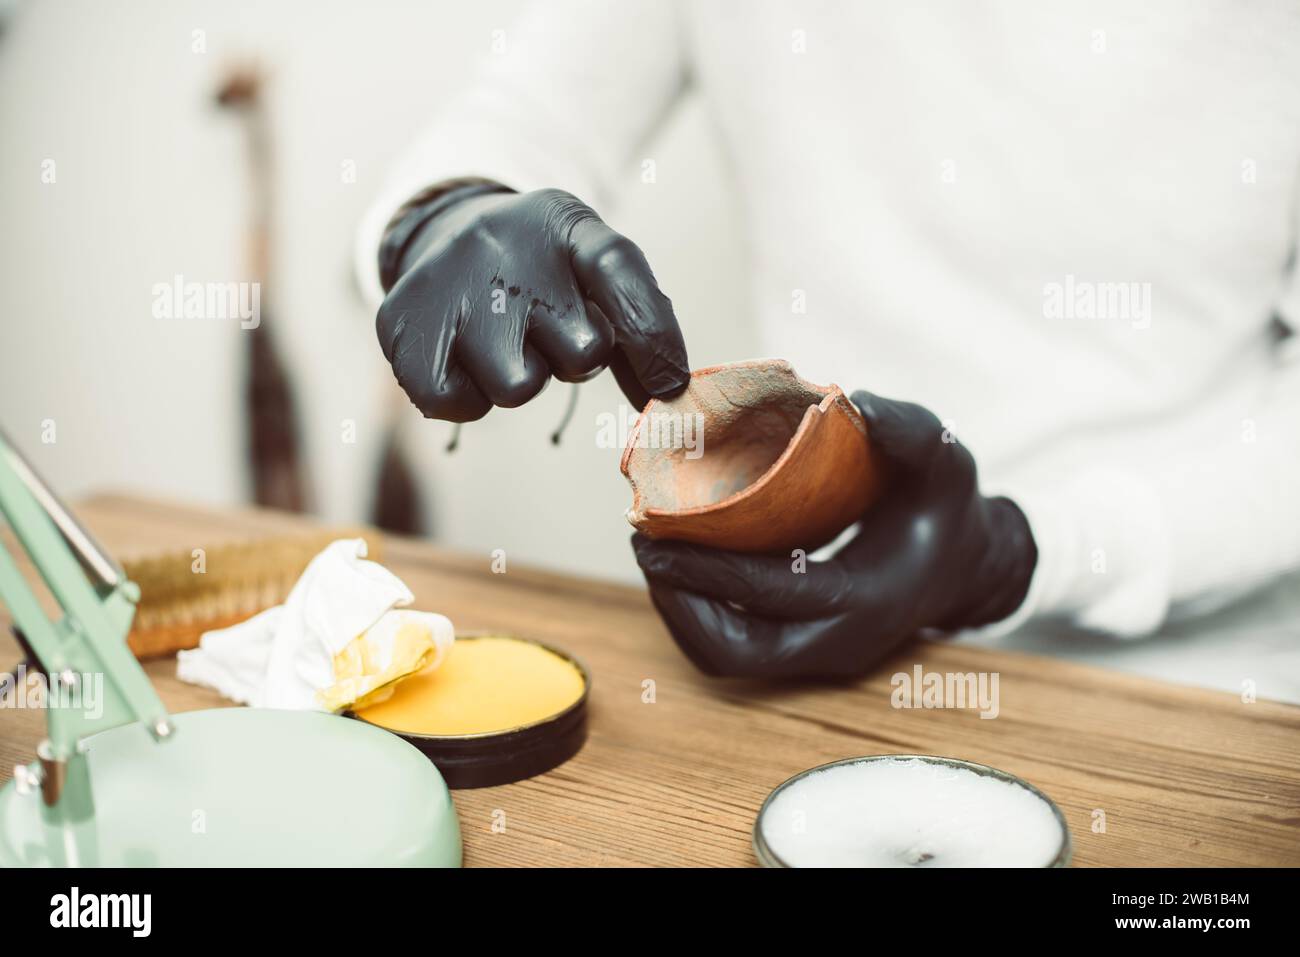 The man cleaning mould on leather product. Leather care concept. Stock Photo